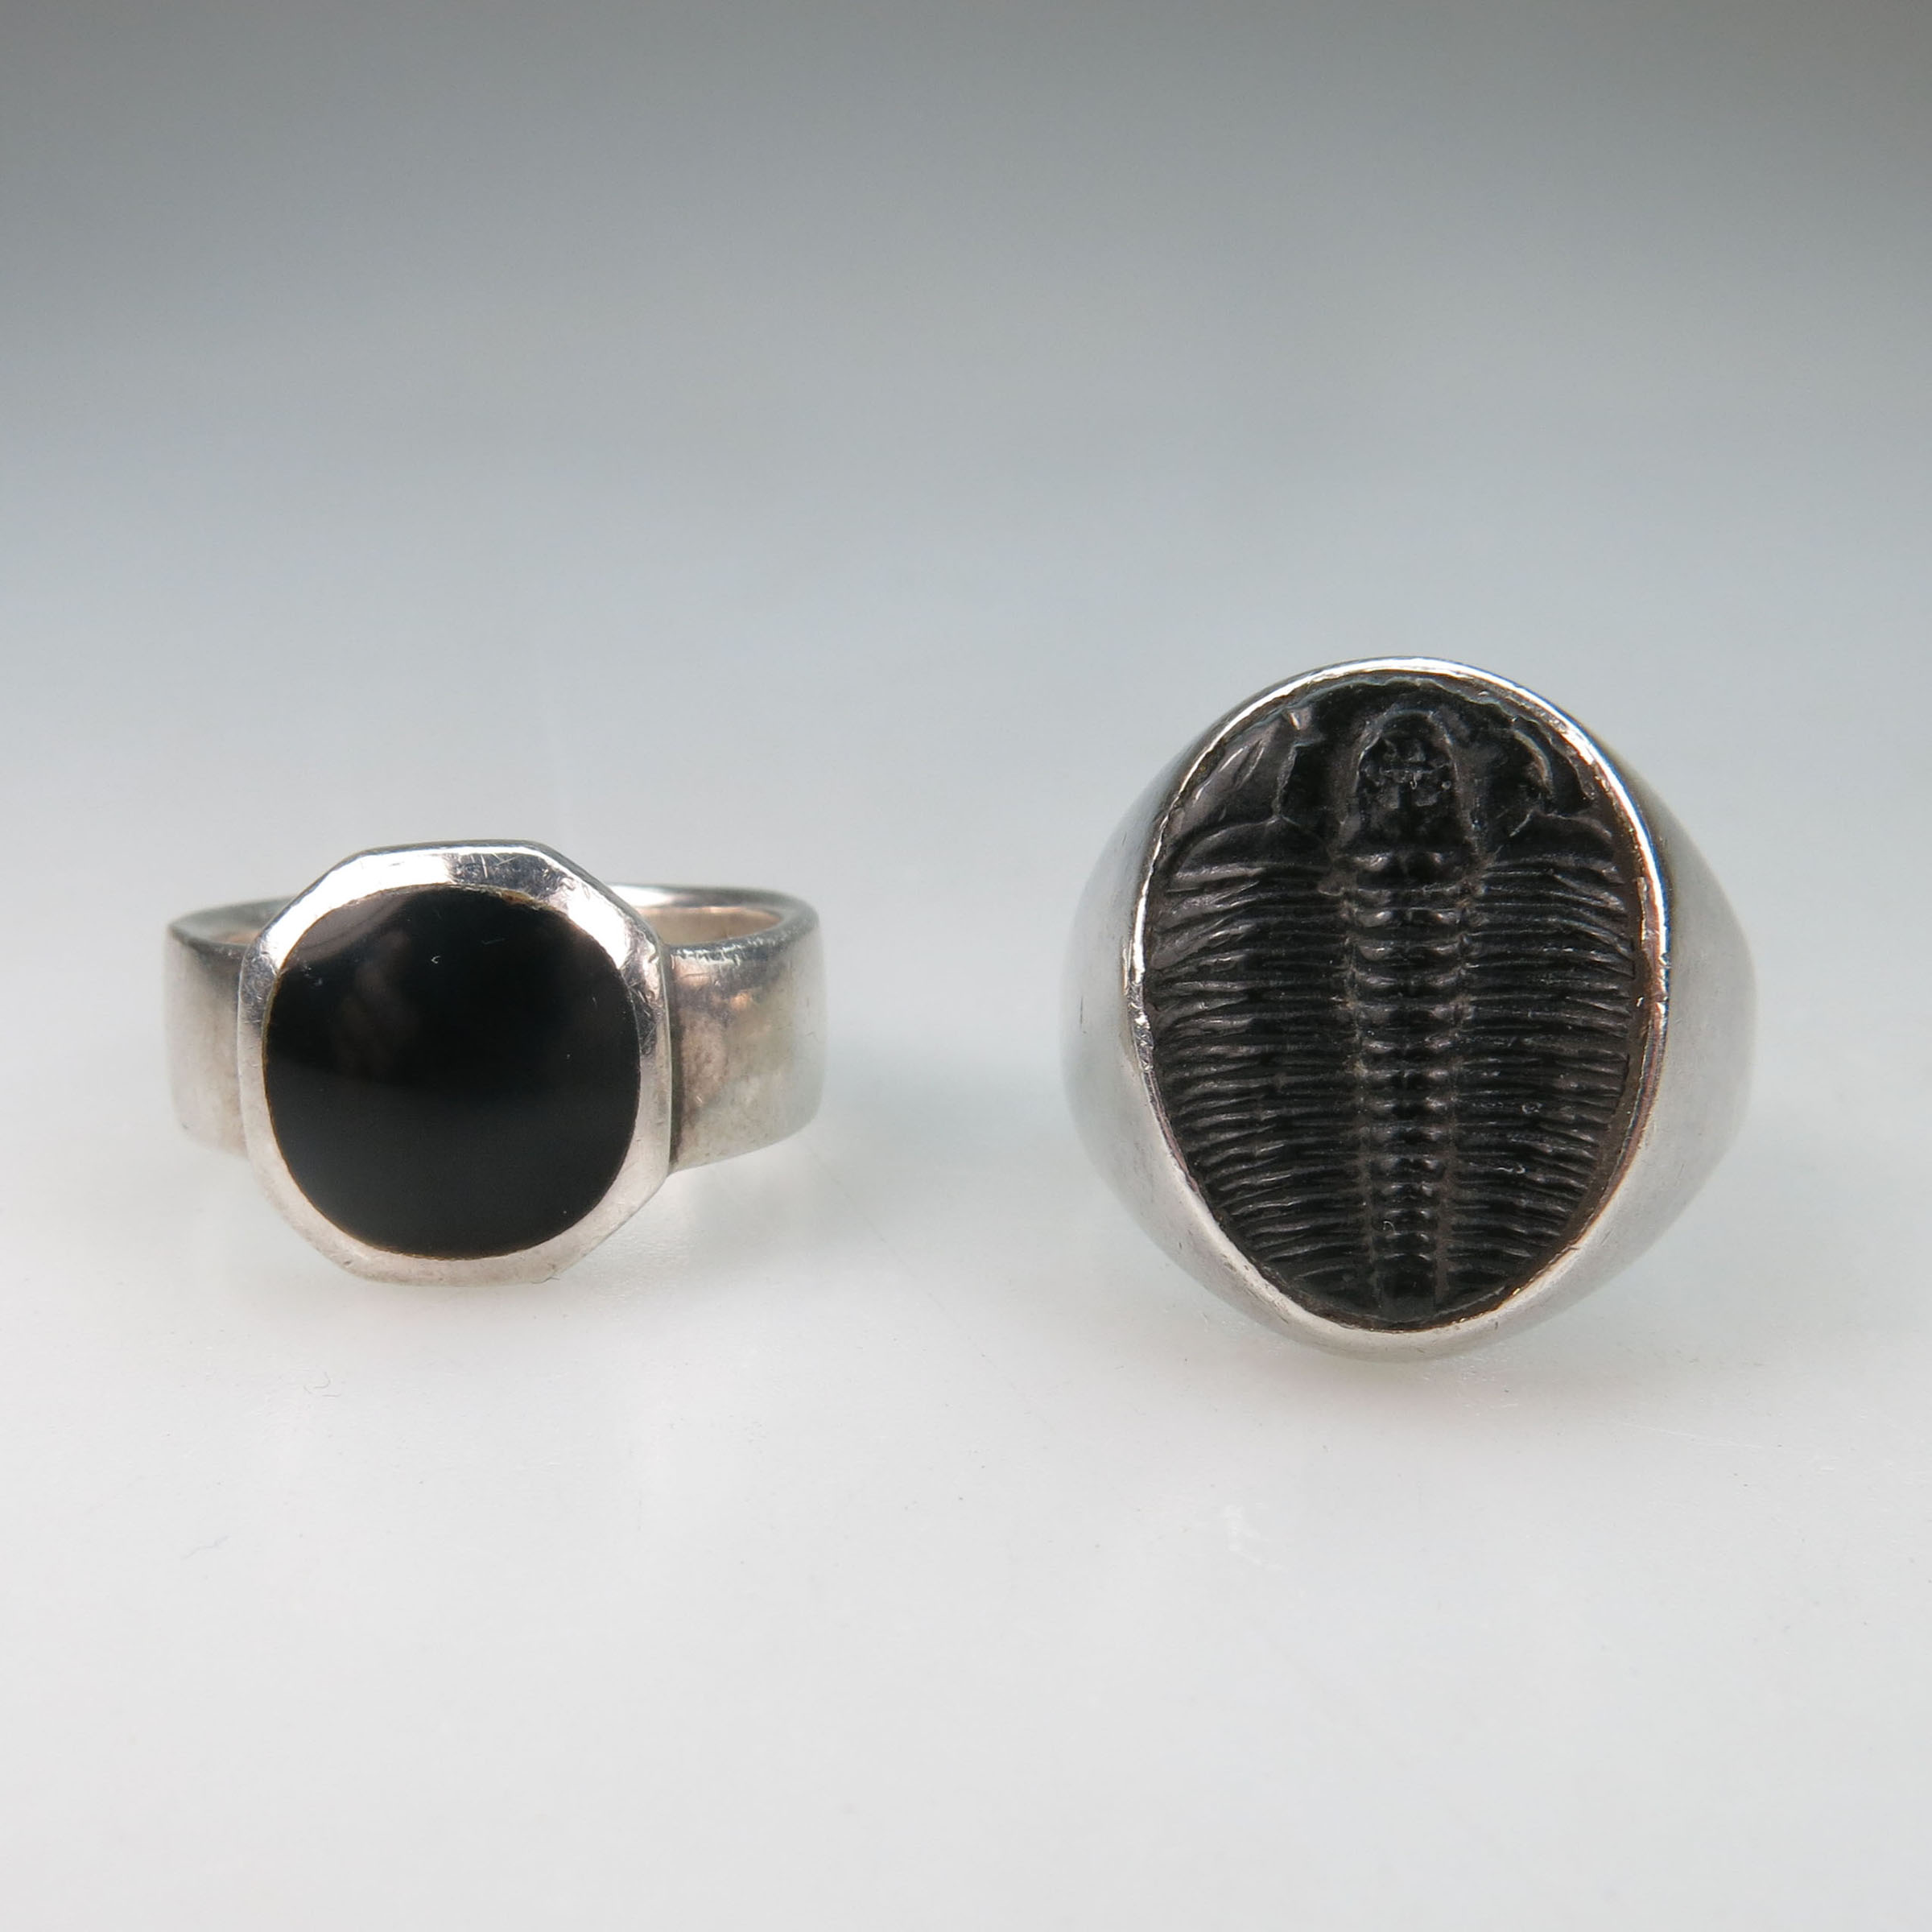 2 x Sterling Silver Rings